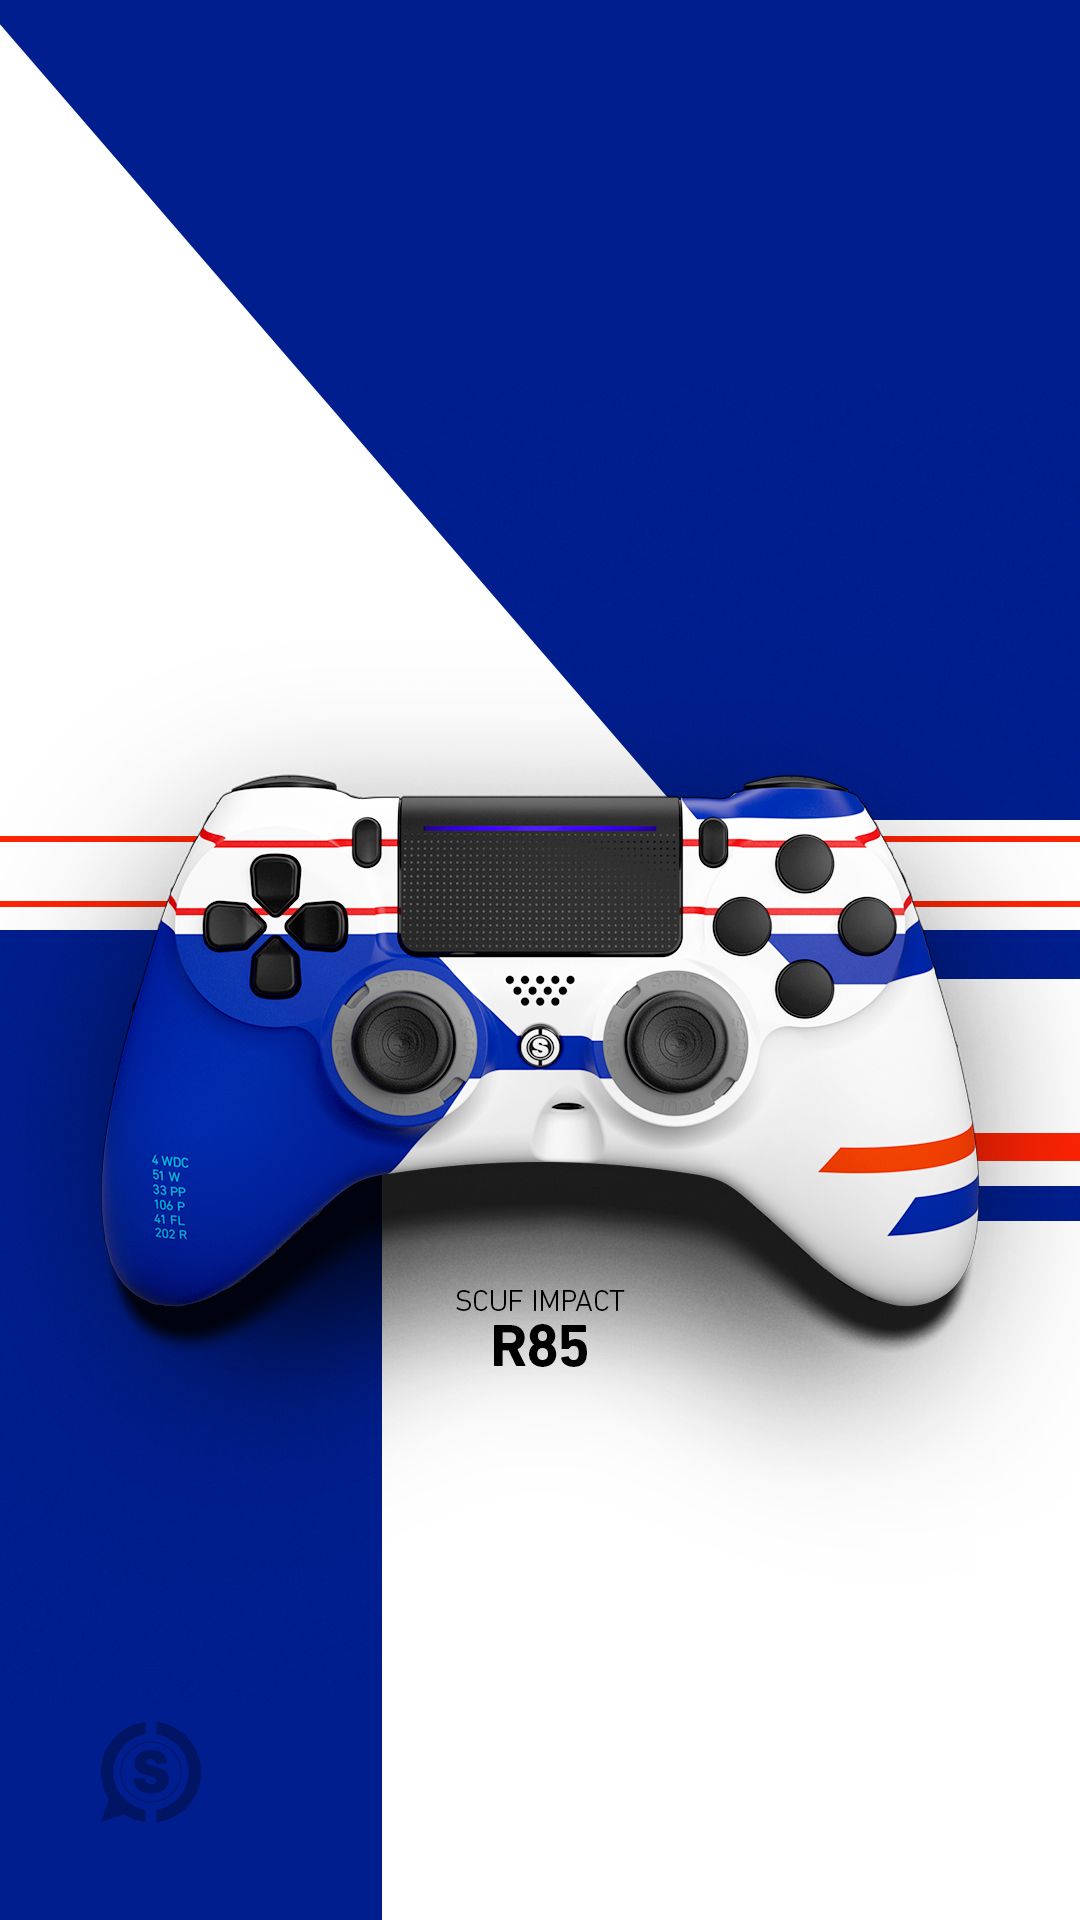 SCUF the legends of the track with these Racing themed wallpaper!